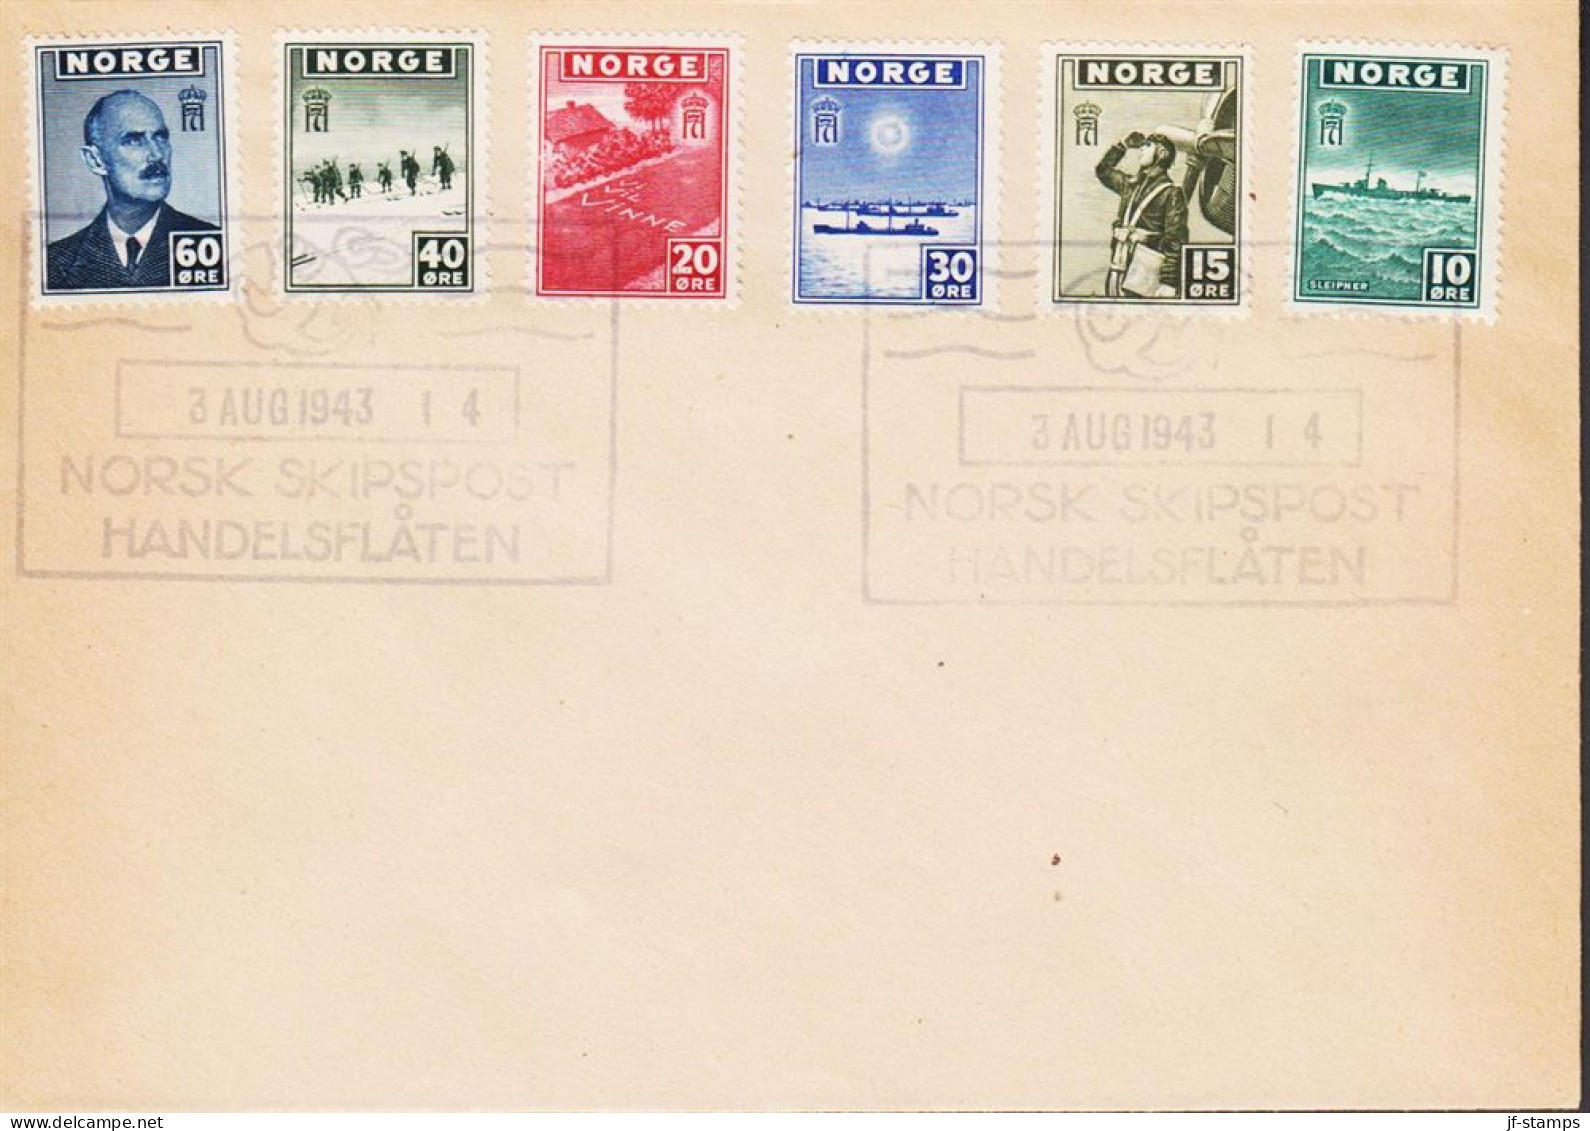 1943. NORGE. Fine Envelope With 10, 15, 20, 30 40 And 60 ØRE London Issue Cancelled With ... (Michel 278-283) - JF545675 - Lettres & Documents